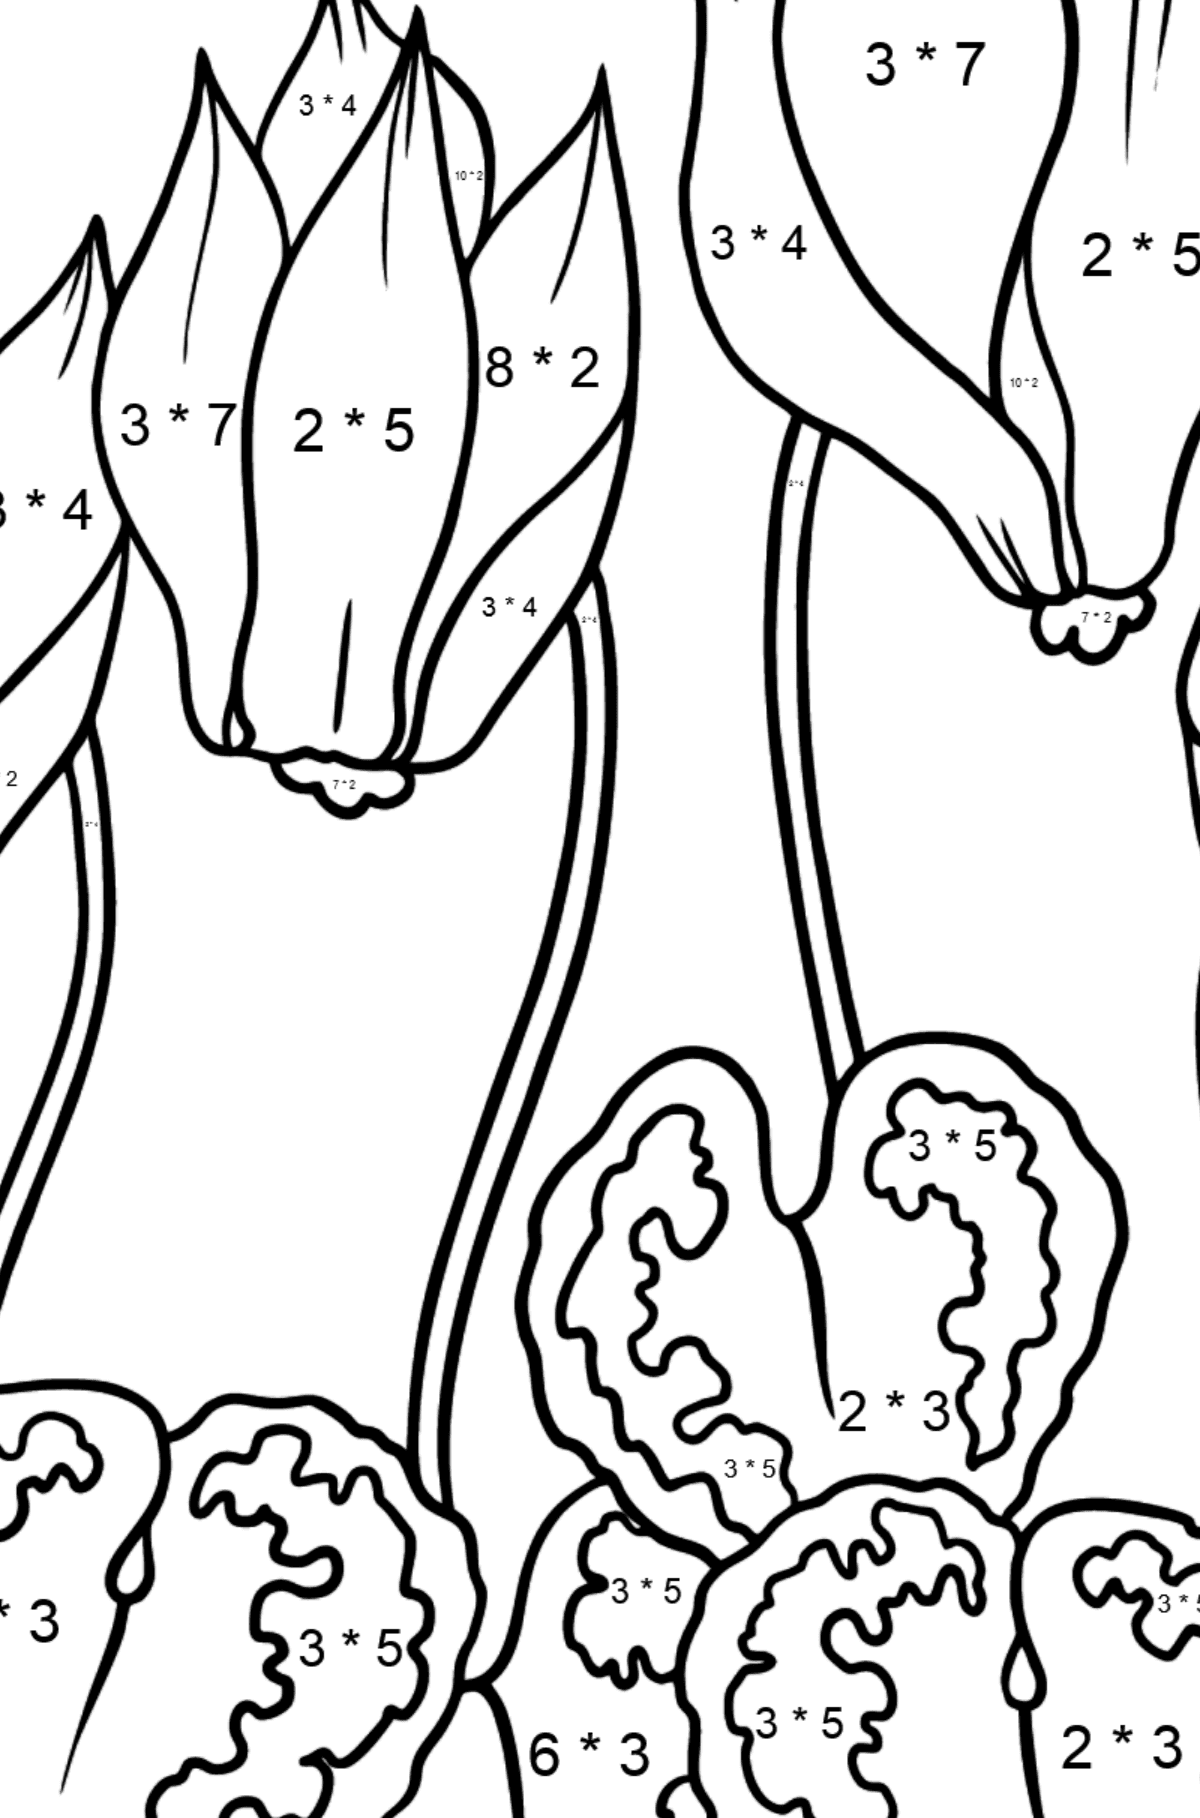 Red Cyclamen Coloring Page - Math Coloring - Multiplication for Kids